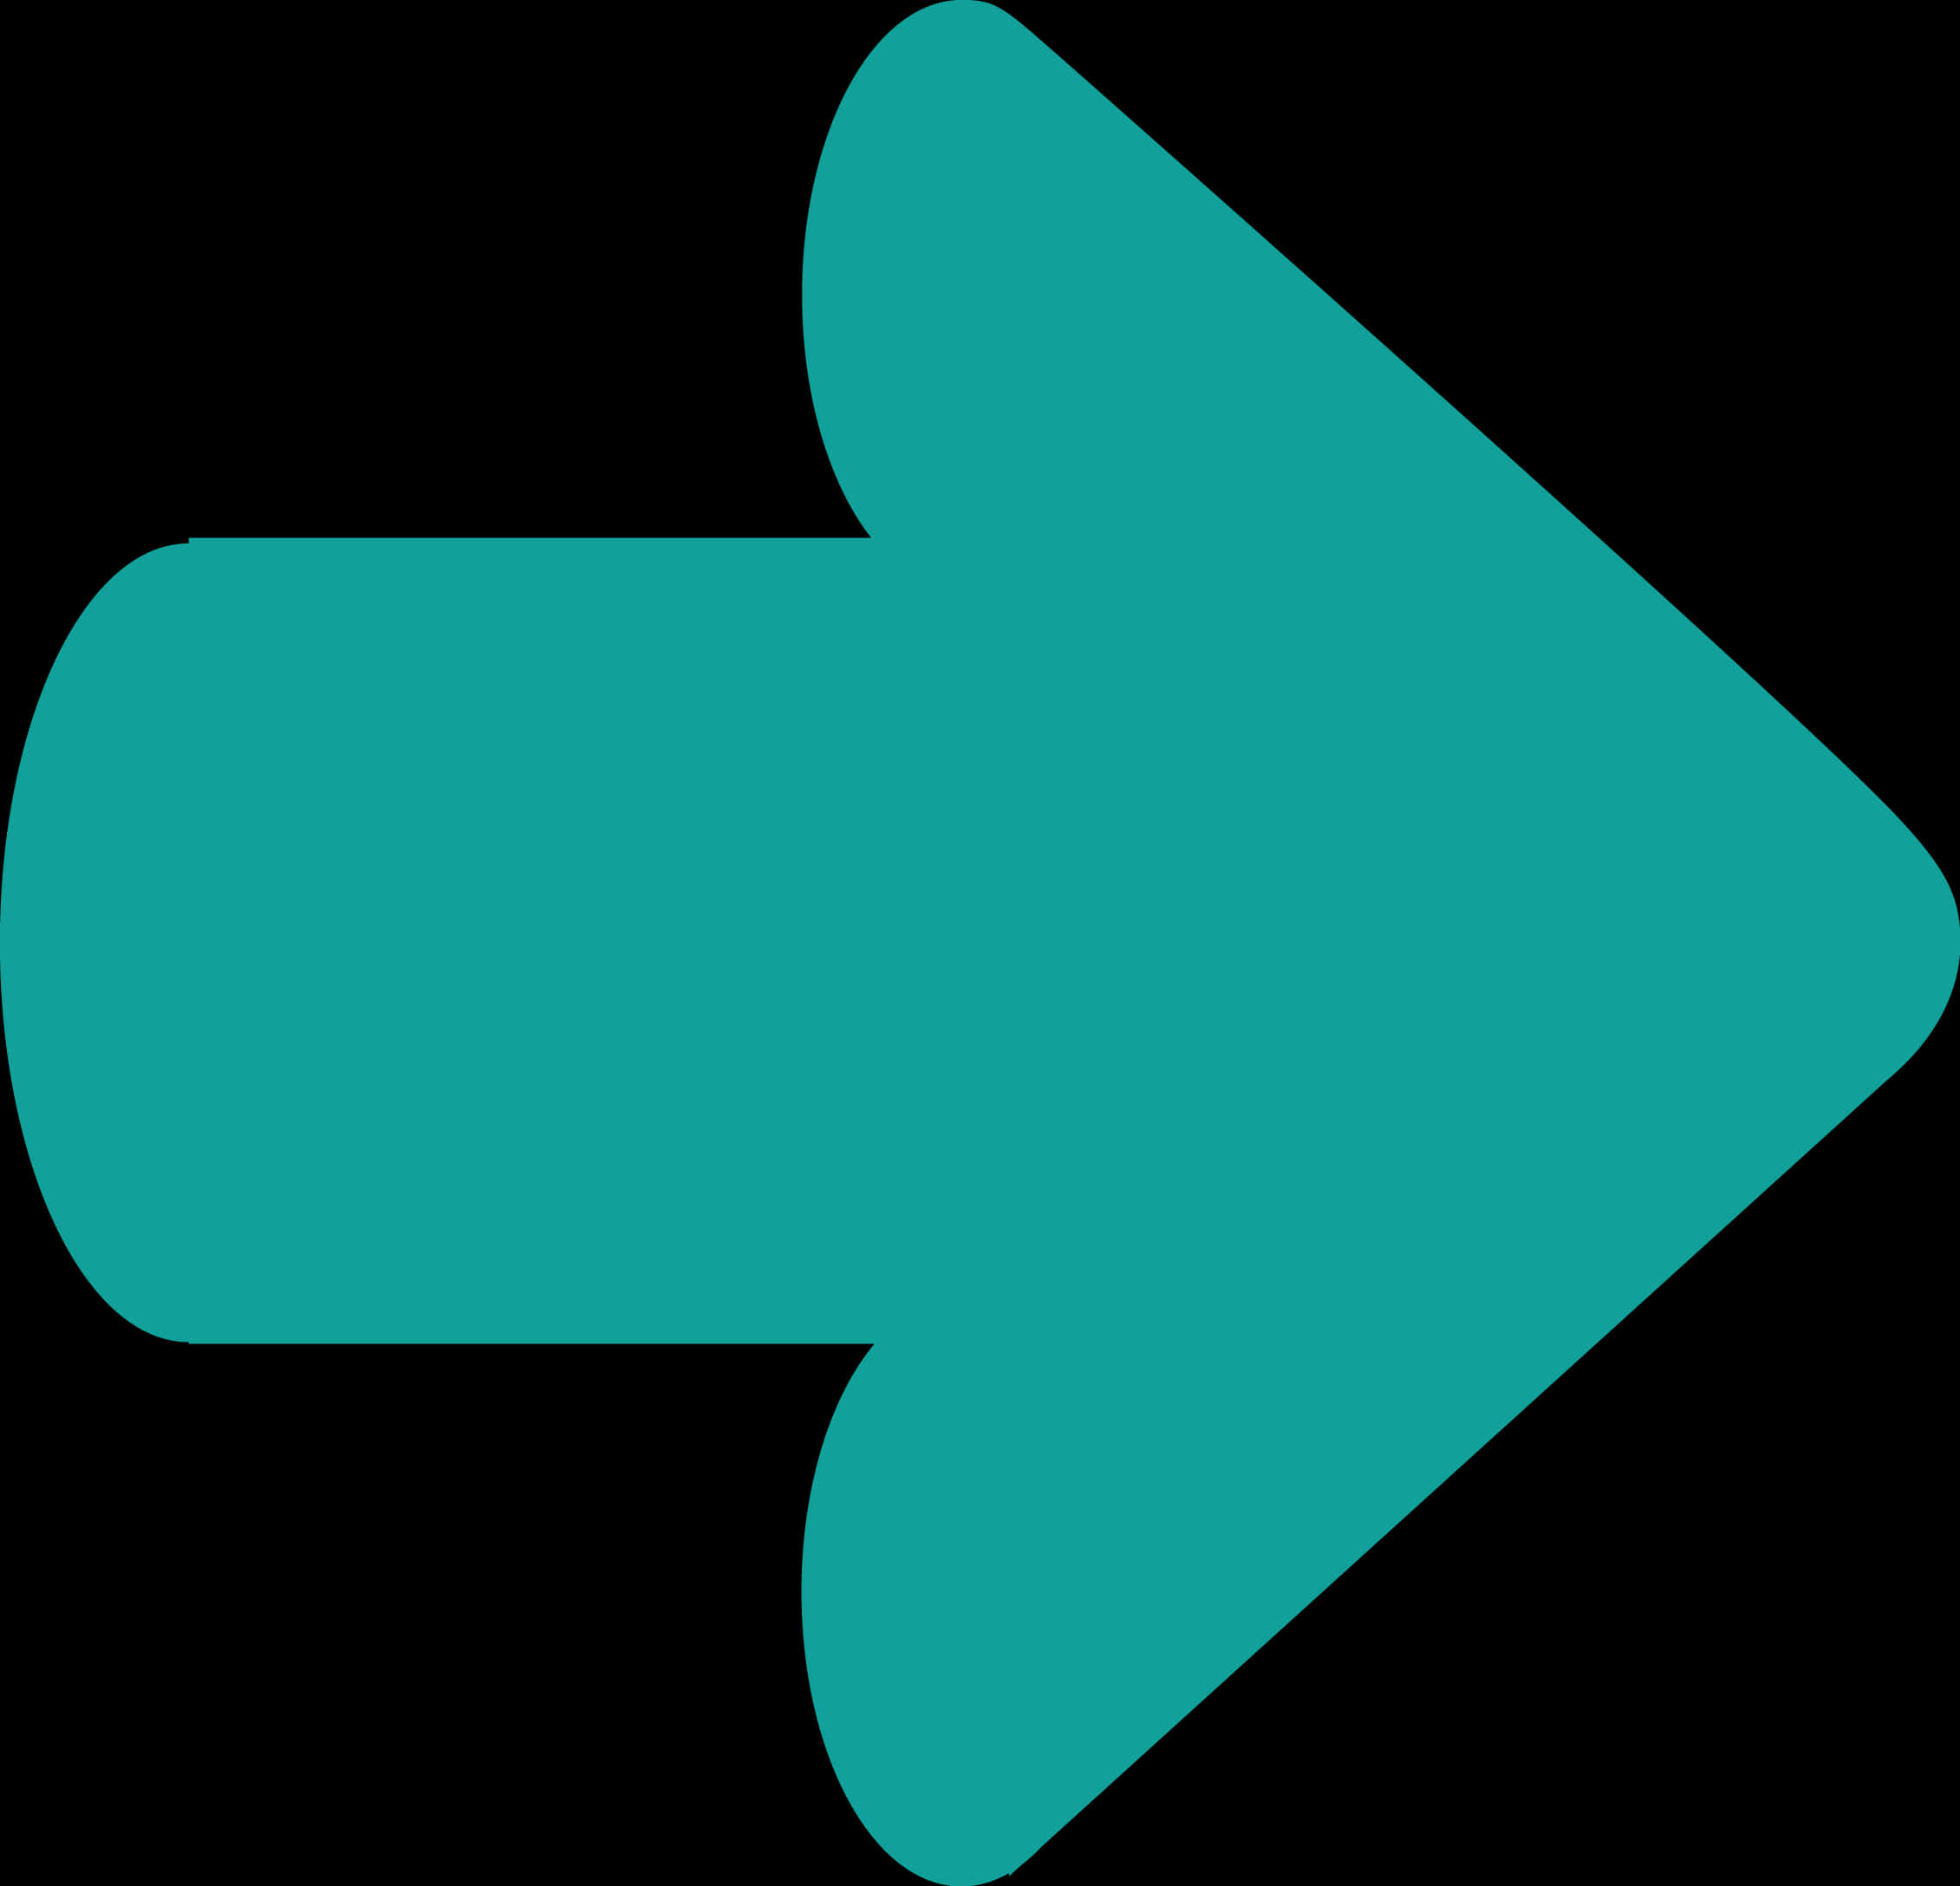 Teal Arrow Graphic